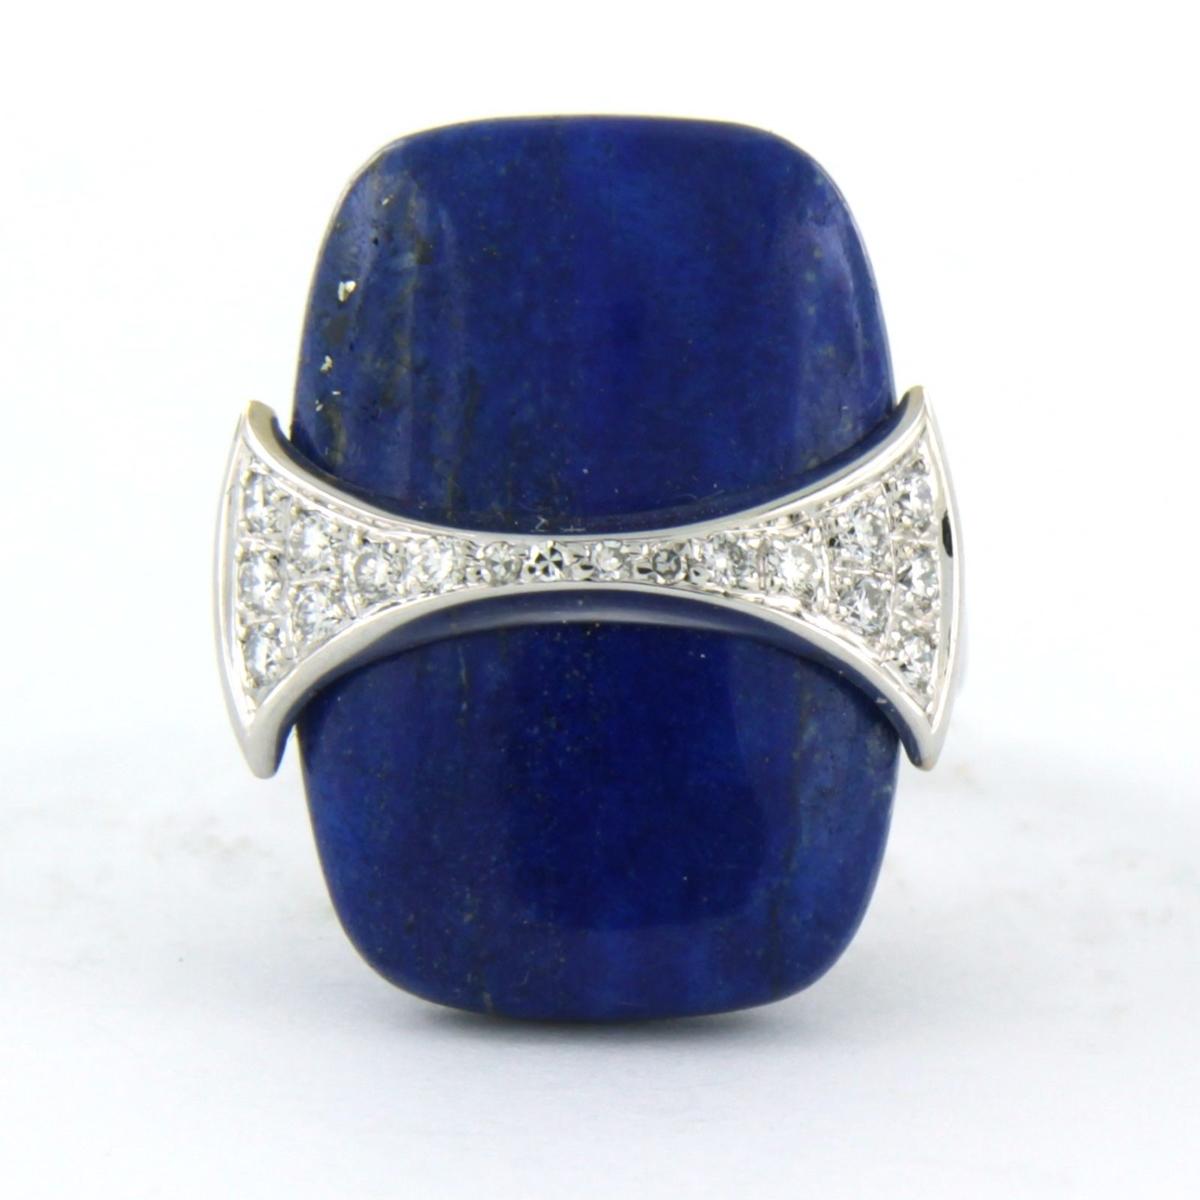 18k white gold ring set with lapis lazuli and brilliant and single cut diamonds. 0.30ct - F/G - VS/SI - ring size  U.S. 5 - EU. 15.75(49)

detailed description:

The top of the ring is 2.1 cm wide

Weight 10.2 grams

ring size U.S. 5 - EU.